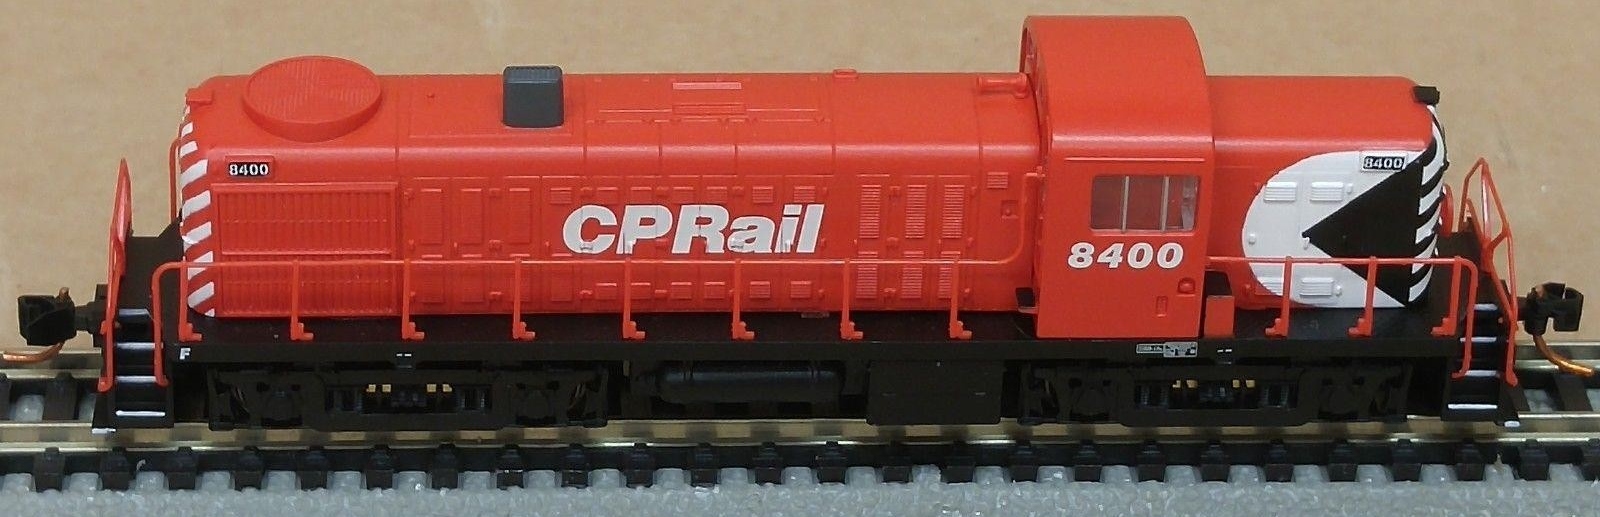 N Scale - Life-Like - 80092 - Locomotive, Diesel, Alco RS-2 - Canadian Pacific - 8400